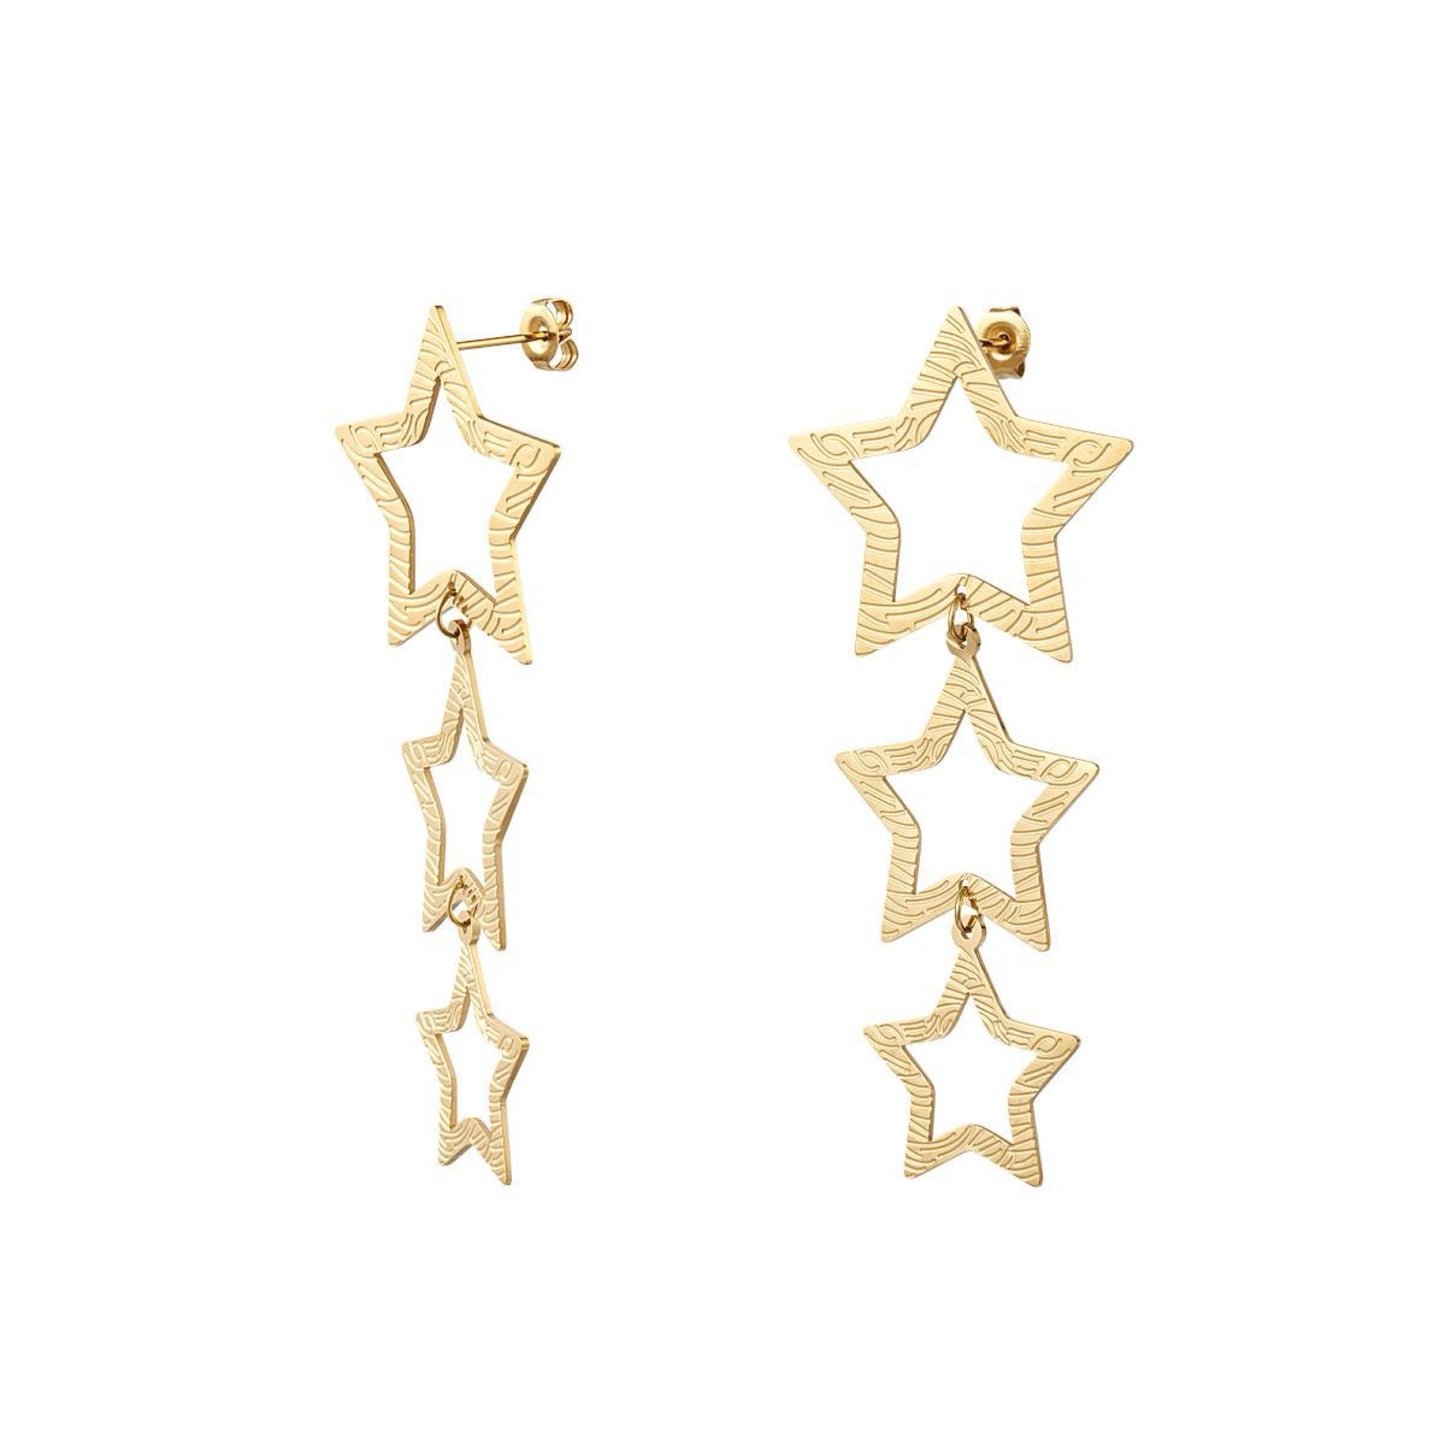 Starry Party Earrings - Gold